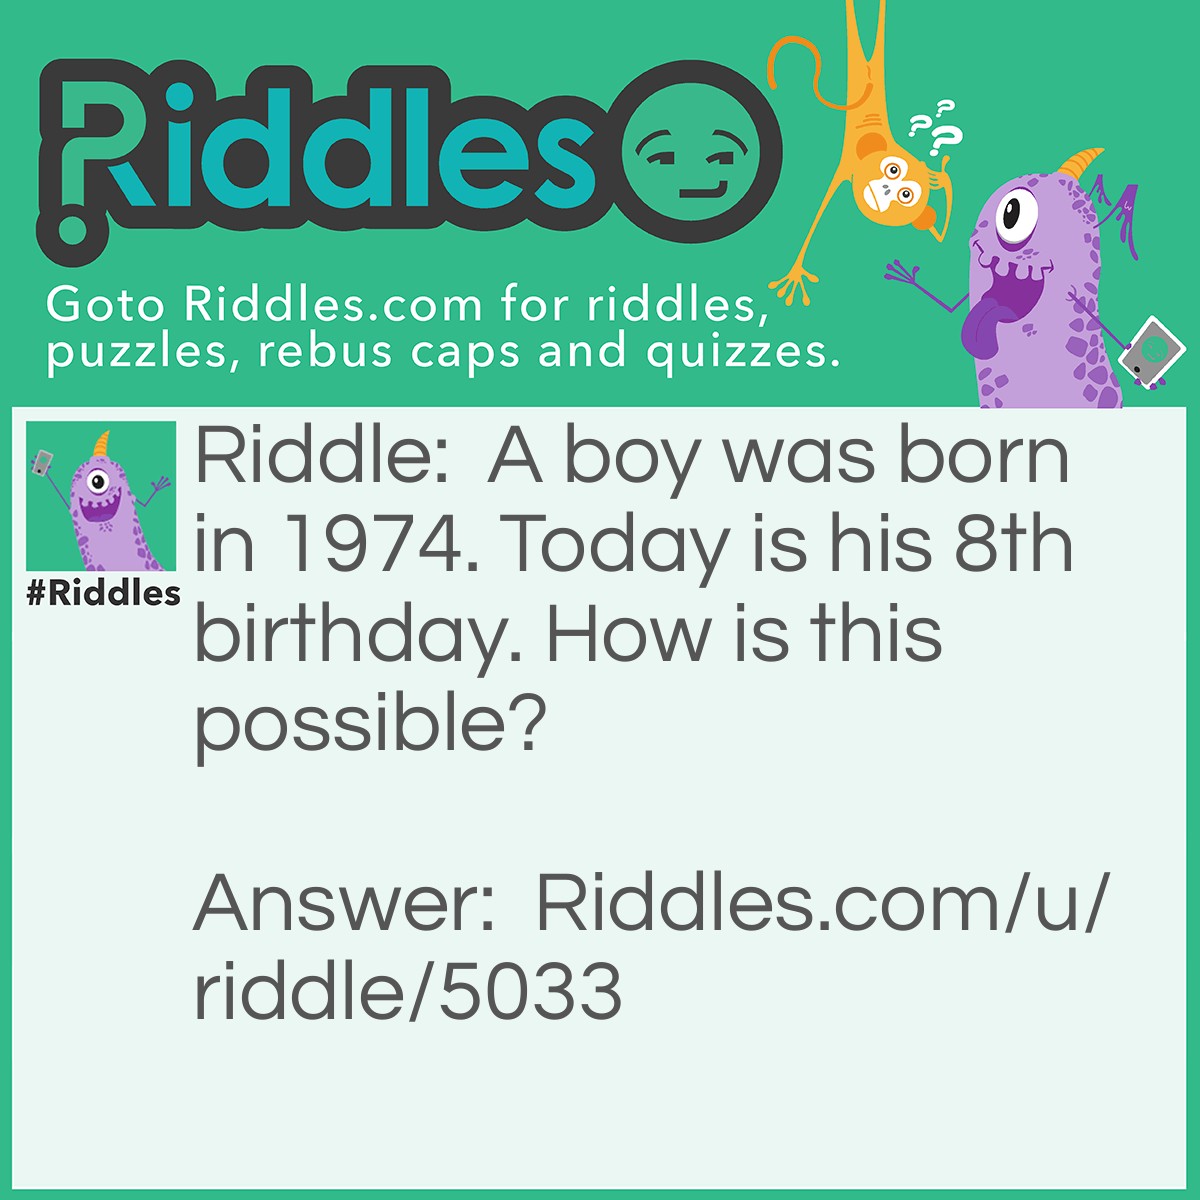 Riddle: A boy was born in 1974. Today is his 8th birthday. How is this possible? Answer: He was born in a hospital room with the address of 1974!